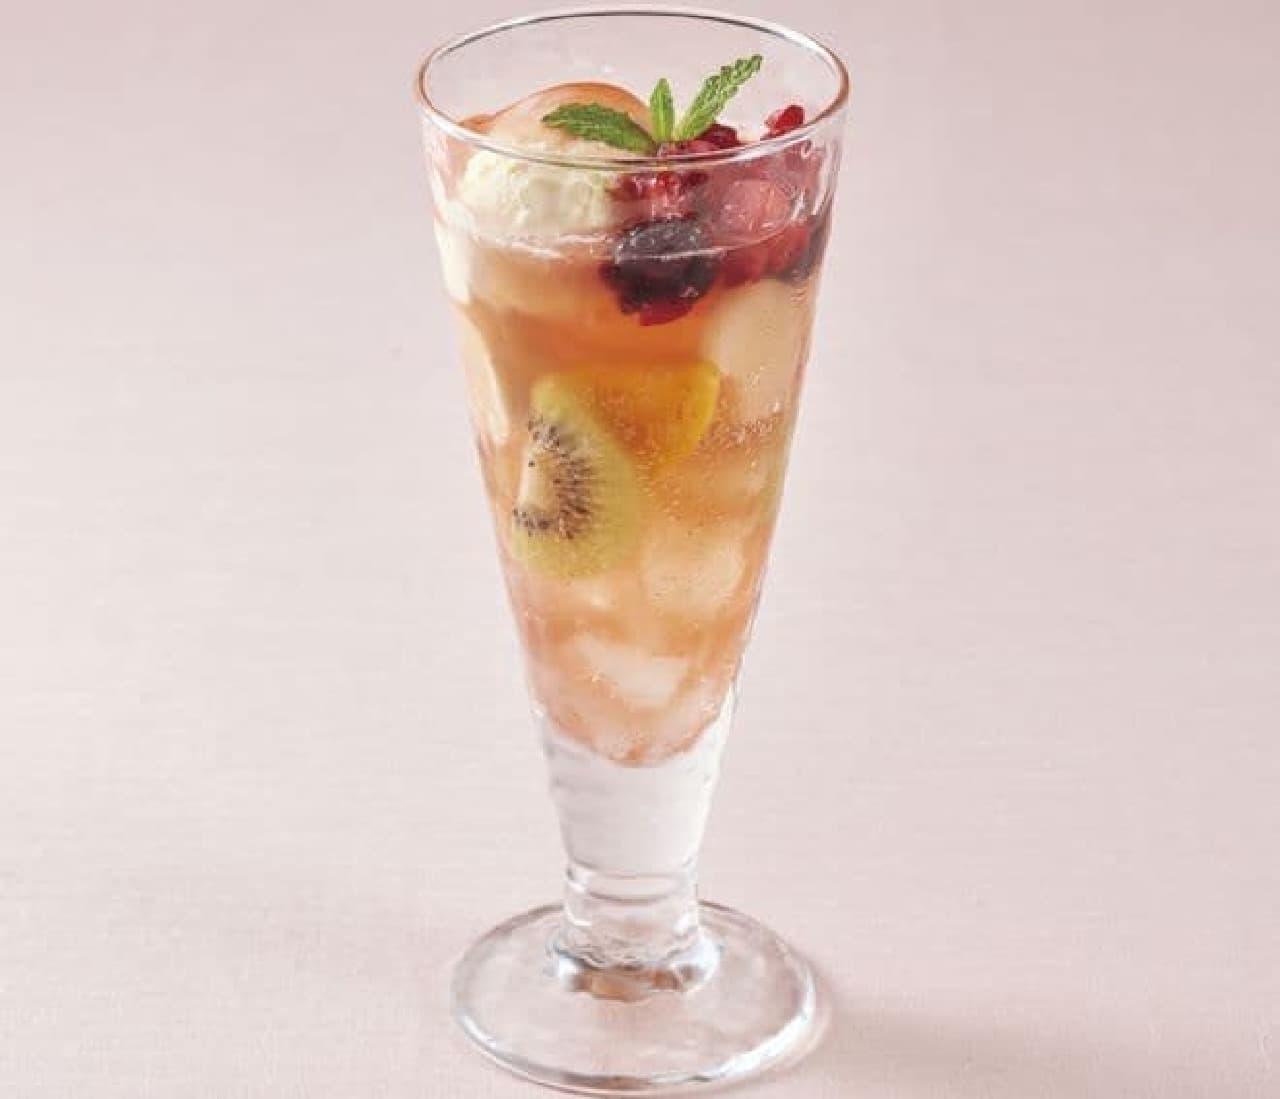 "Koume Soda Fruit Punch" is a sweet that matches Koume Soda with 5 kinds of fruits such as kiwi, banana, and mango.